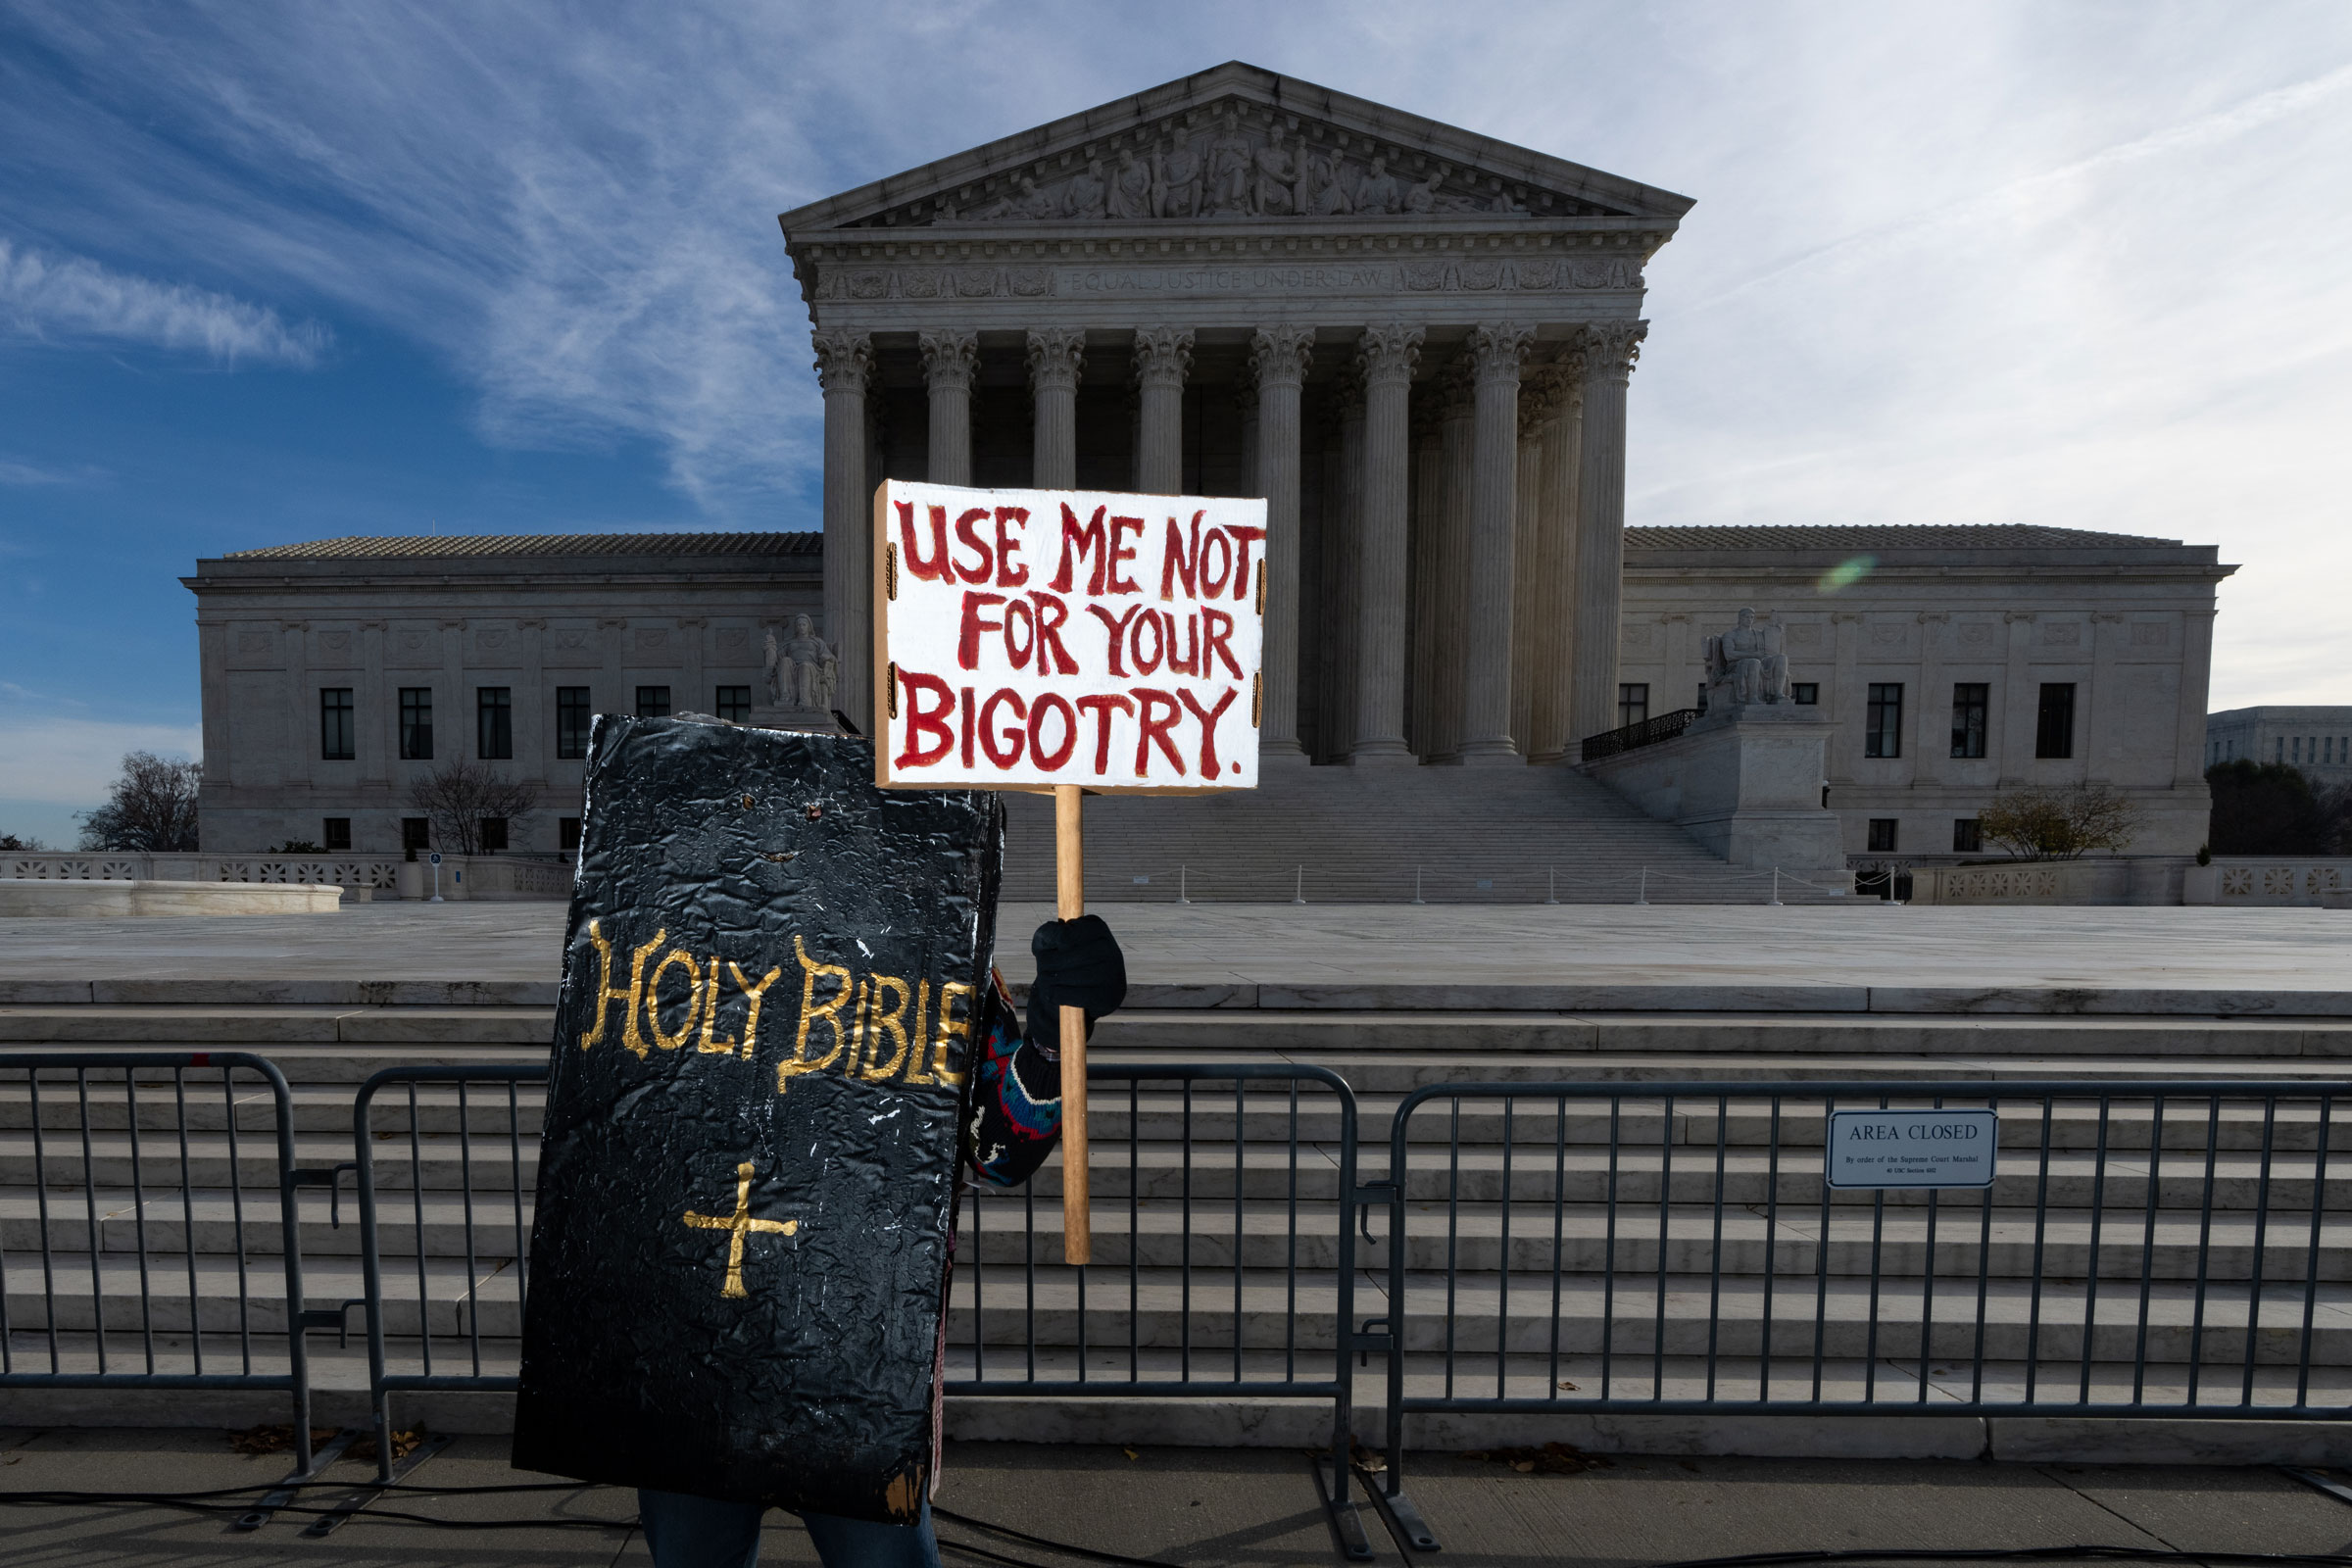 A protester dressed in a bible costume stands in front of the U.S. Supreme Court on Nov. 5, 2022.